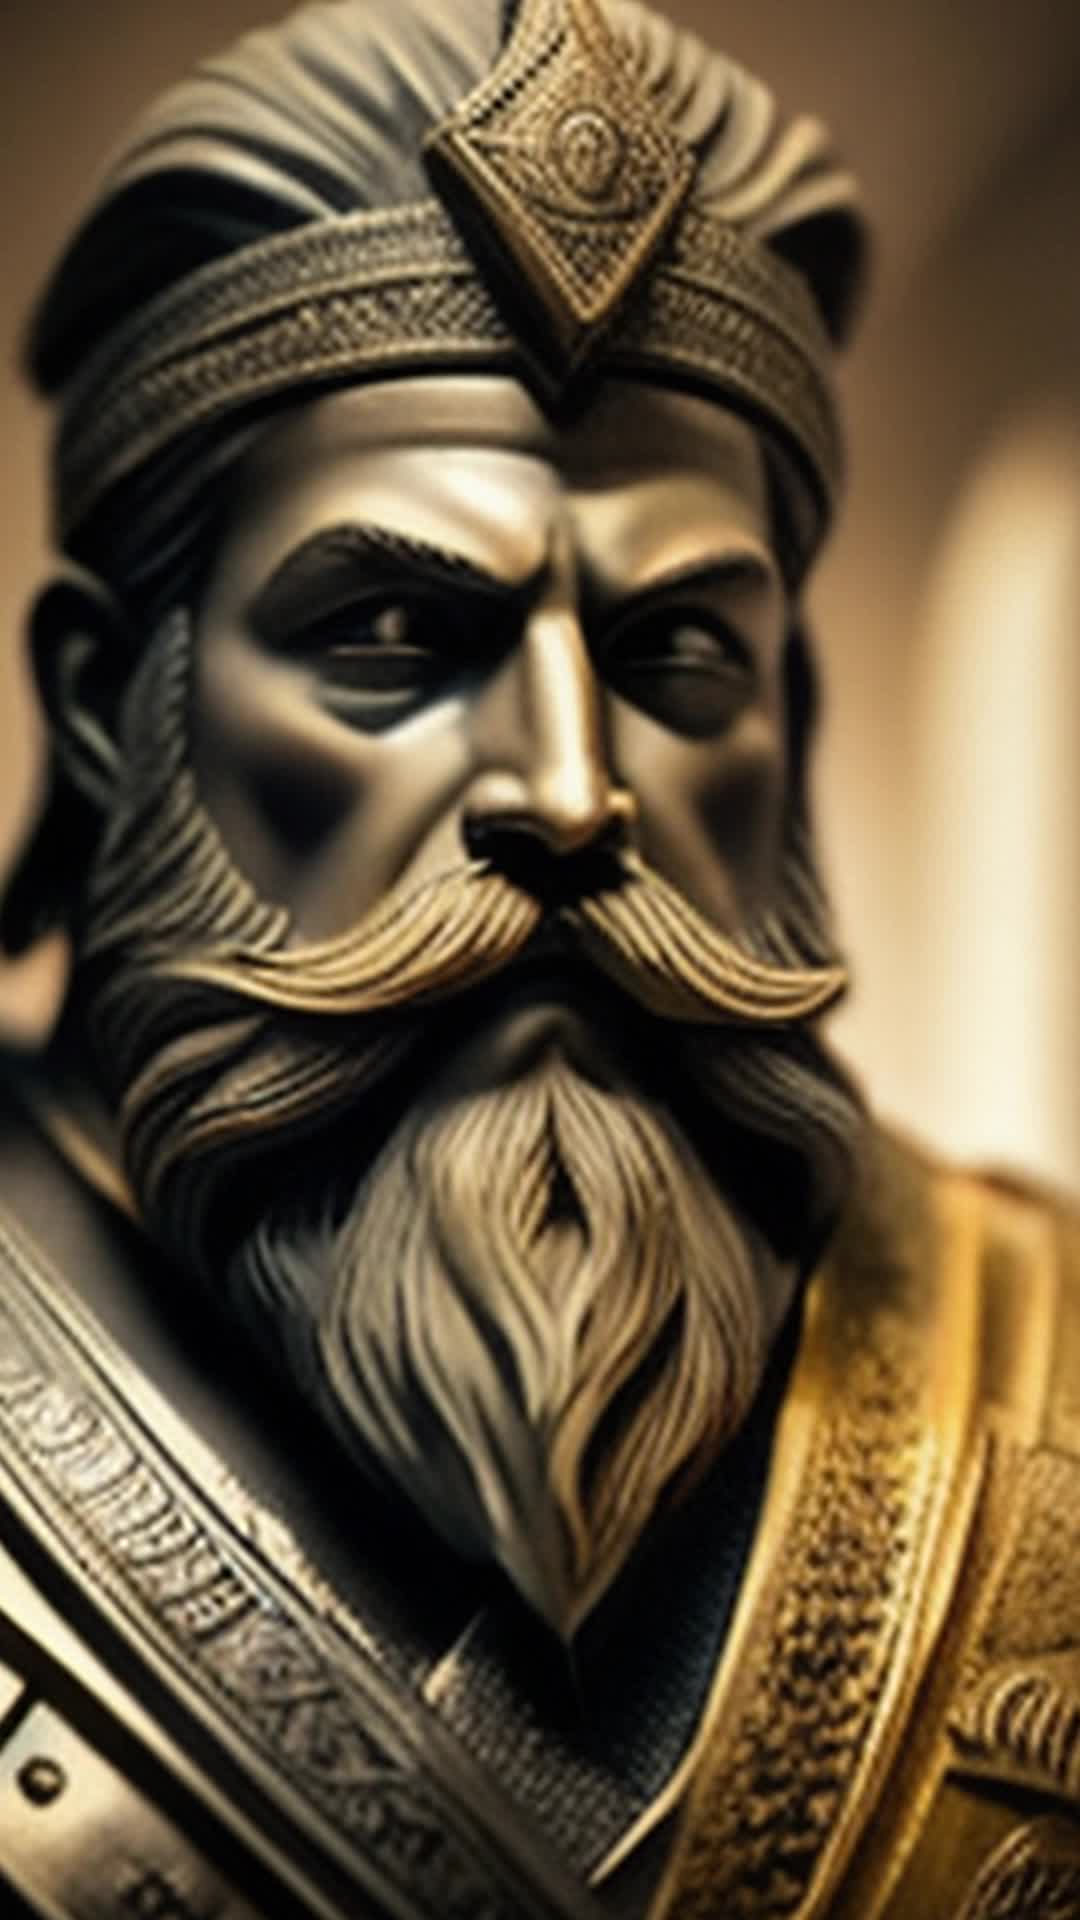 Historical grooming beliefs, strength imparted by right beard oil, connection to modern Beardly beard oil, ceremonial traditions, empowerment through grooming, Sculpted statue of ancient warrior with full beard, dramatic uplighting, intricate details on armor and facial features, timeless and stoic expression, wide-angle view, powerful visual narrative, sharp focus, soft shadows